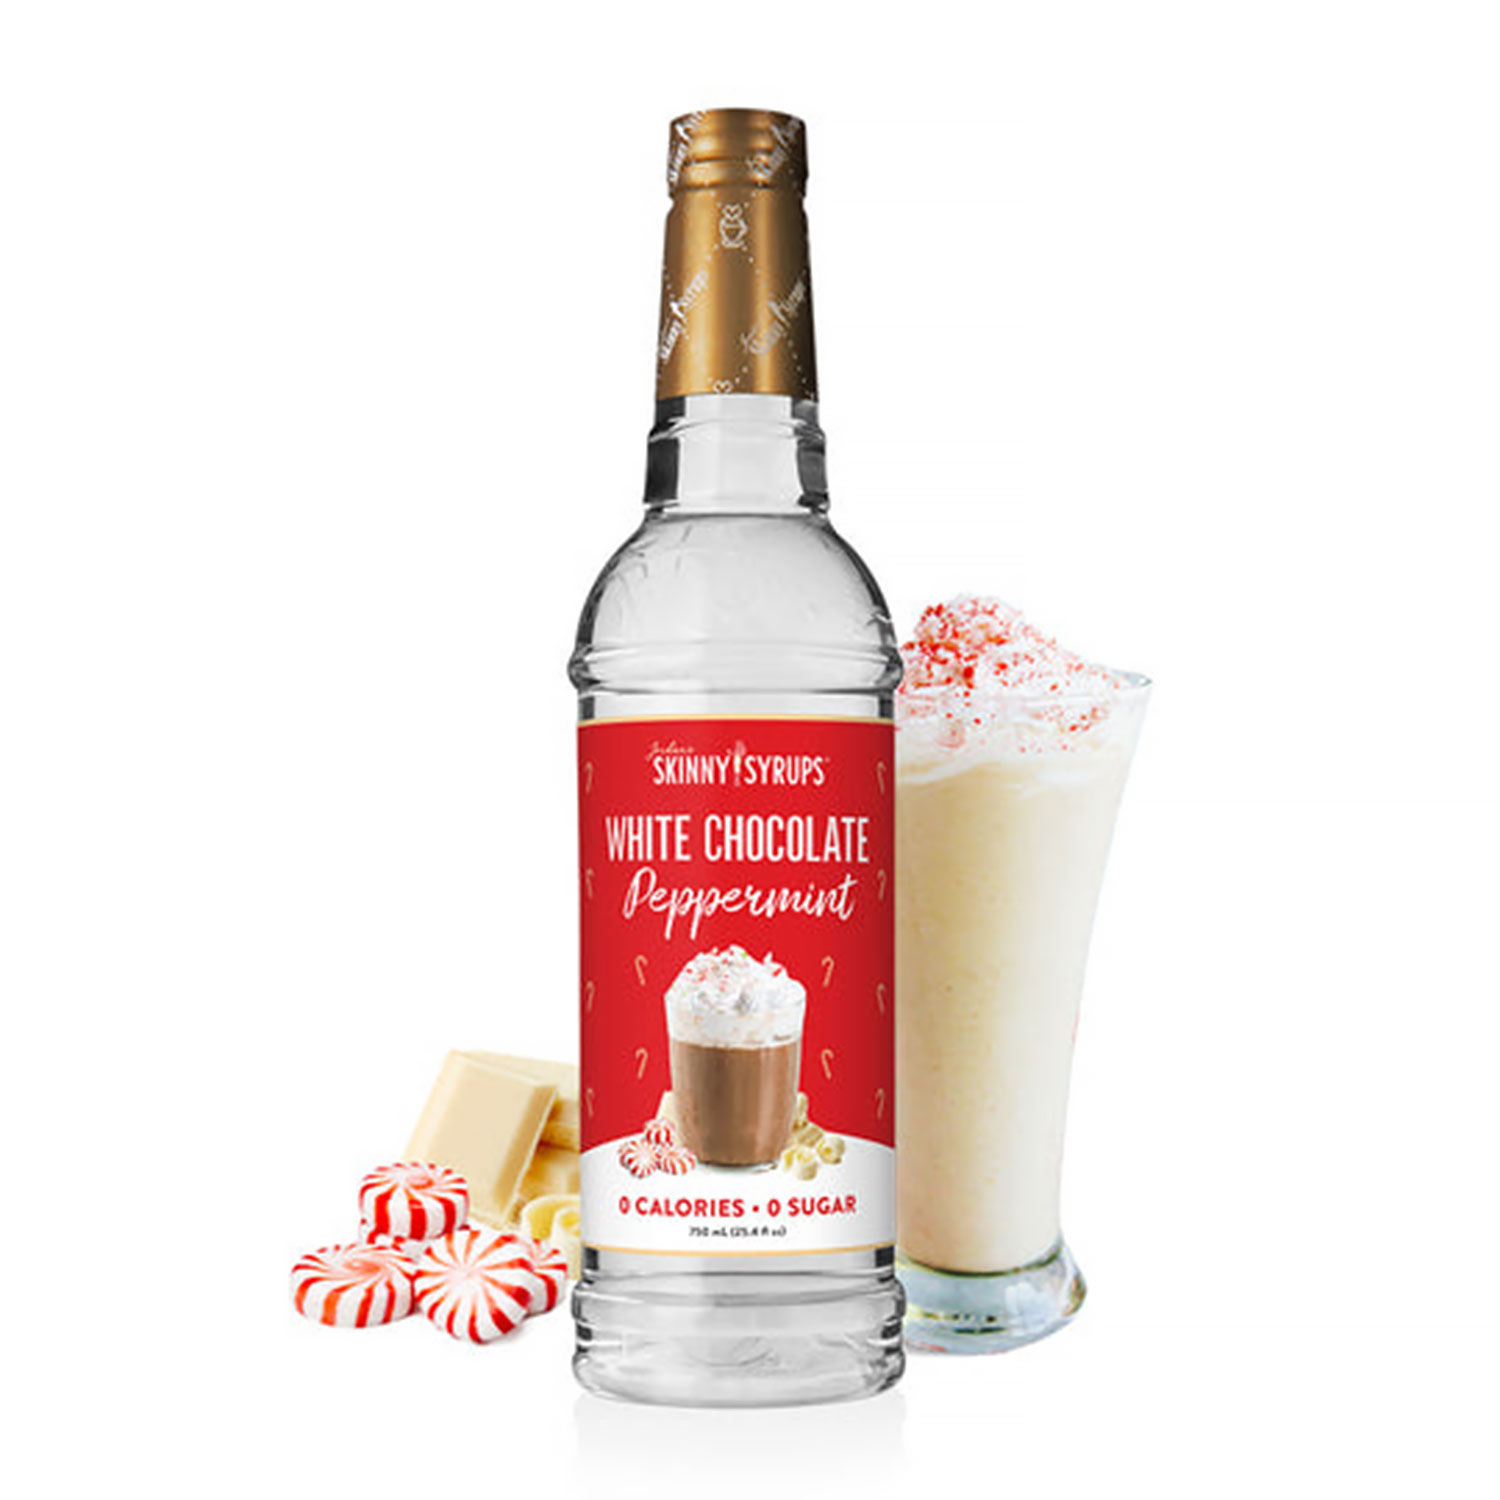 White Chocolate Peppermint Skinny Syrup